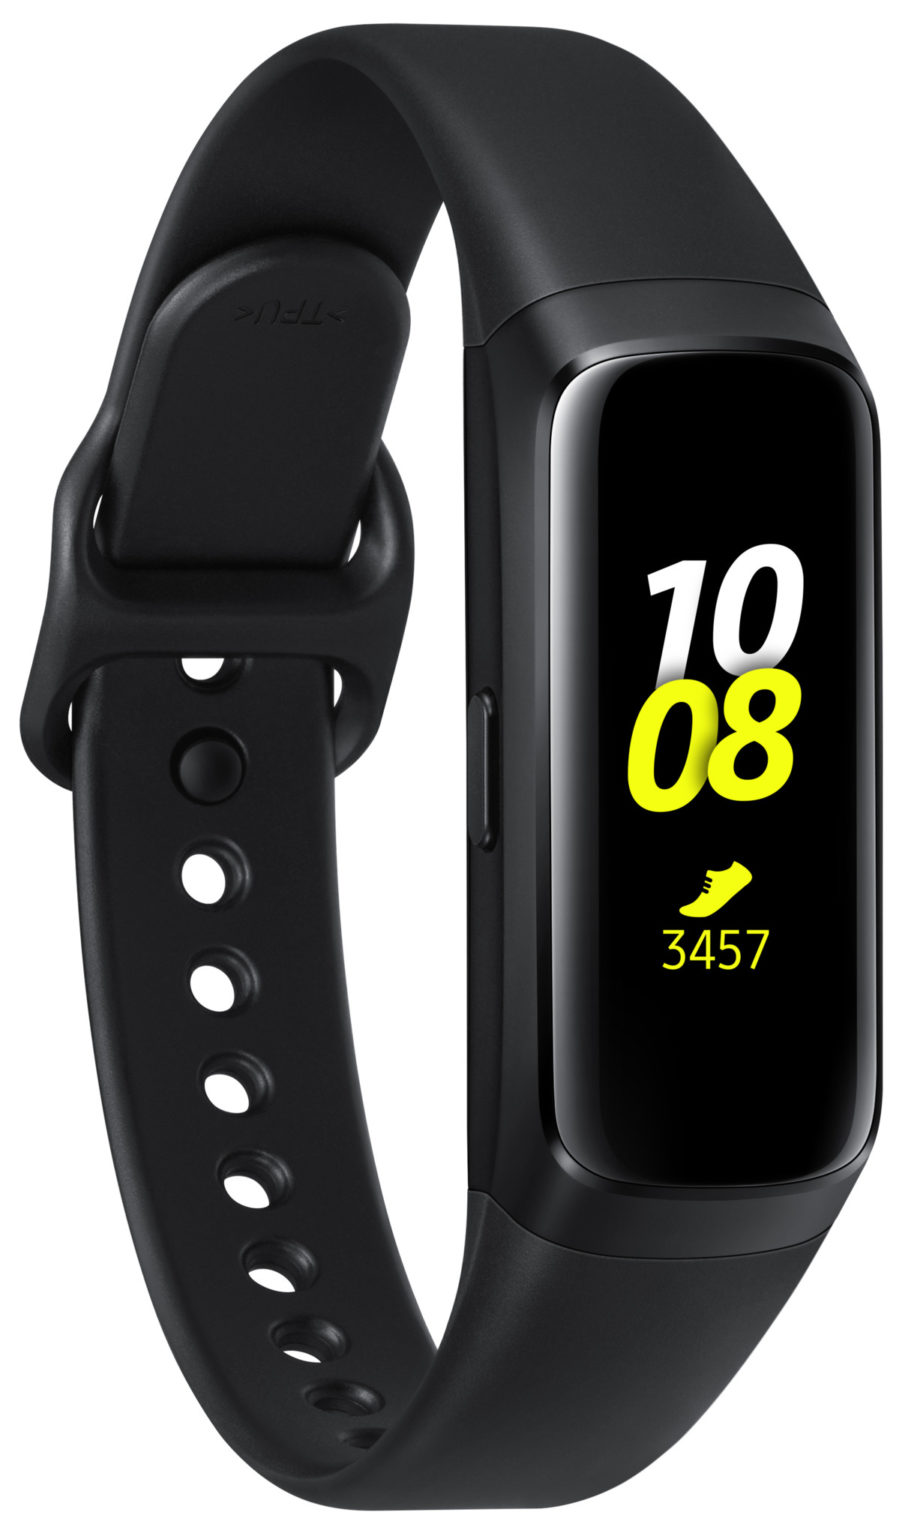 For Best Galaxy Fitness Tracker